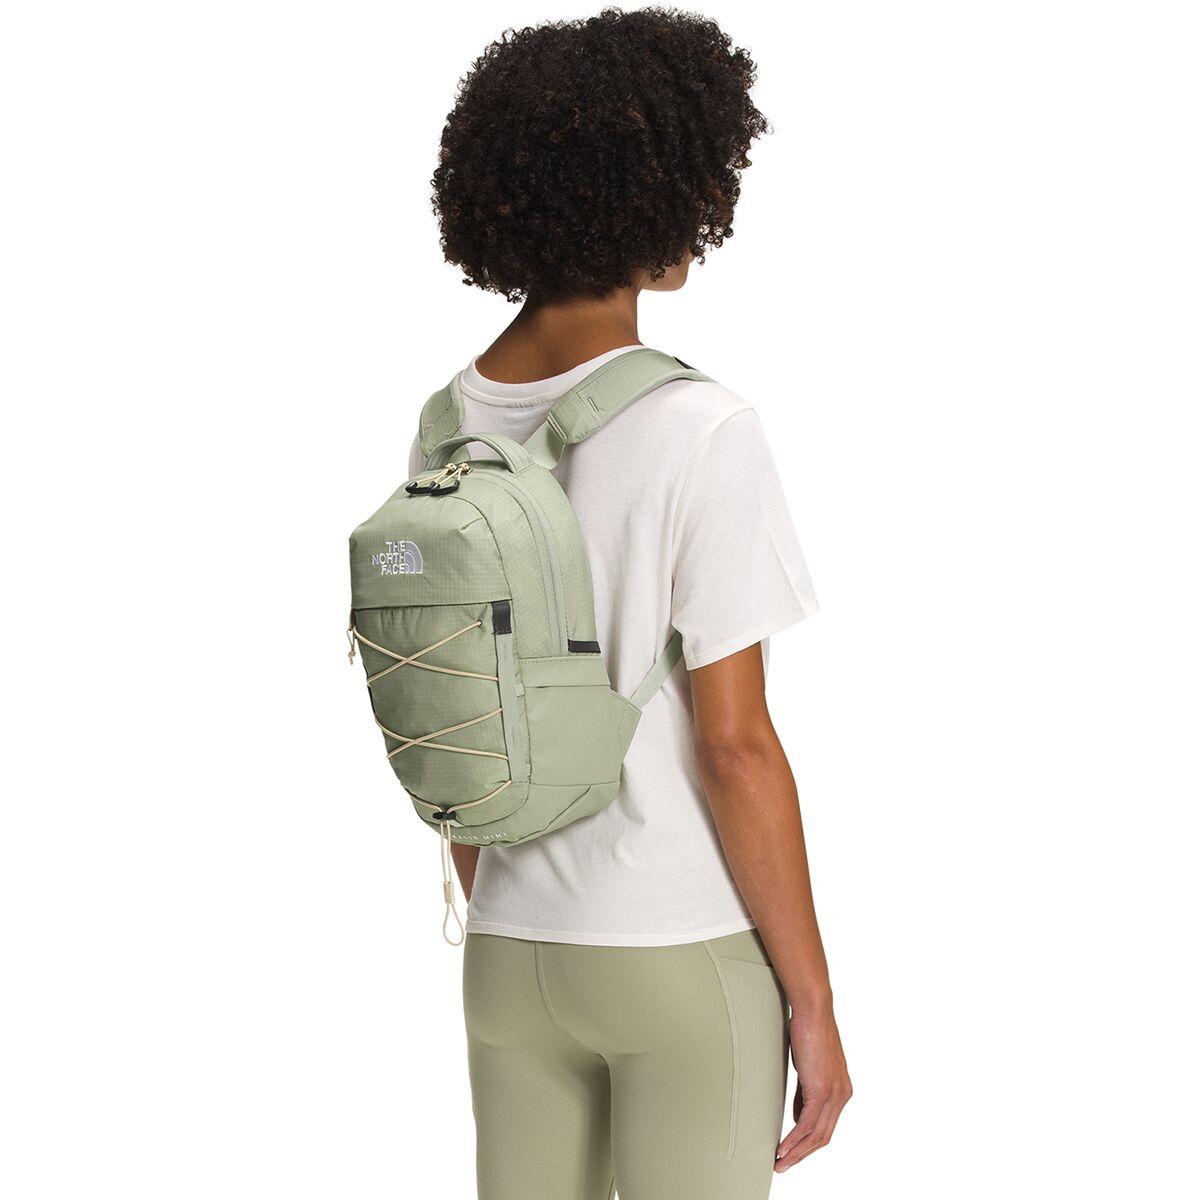 The North Face Borealis Mini Backpack in Green for Men | Lyst